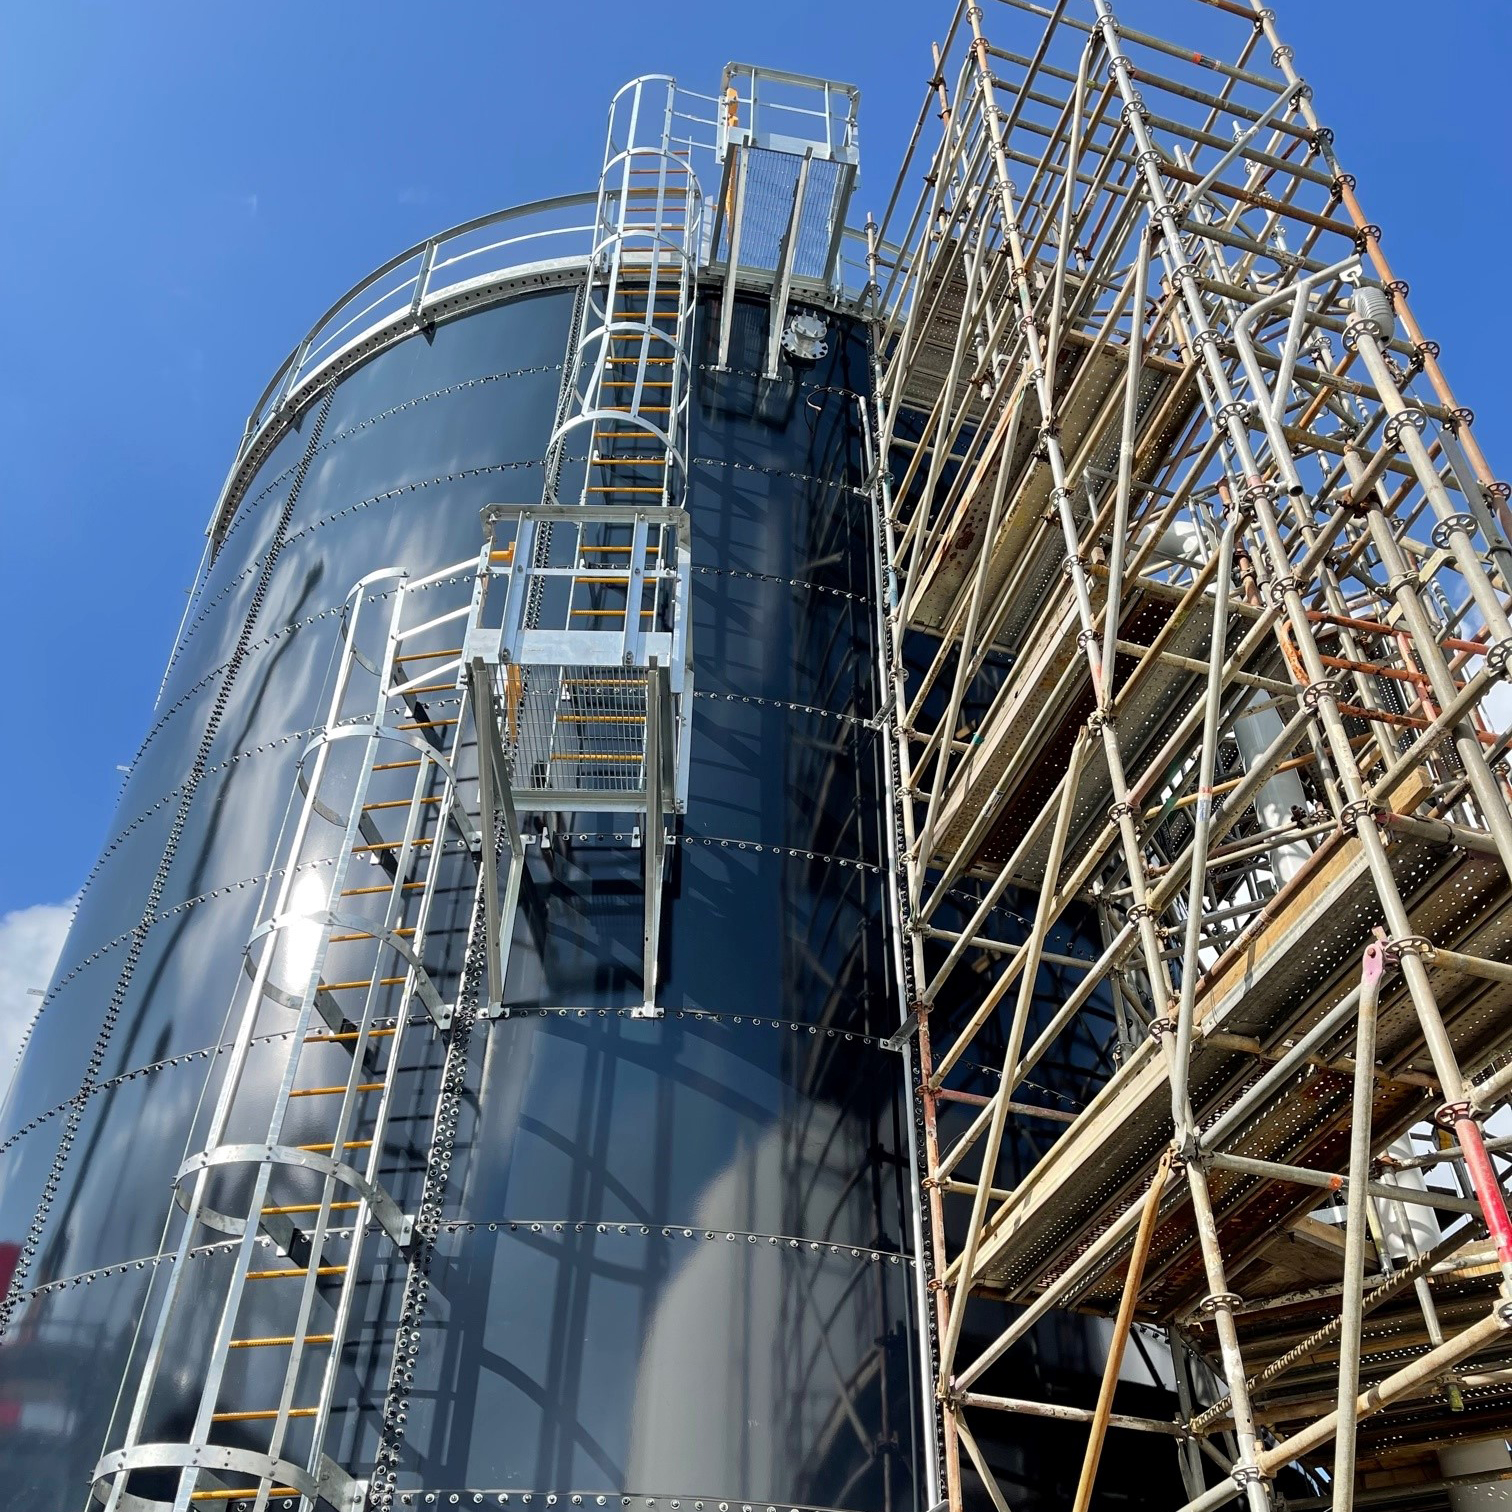 Blue waste water storage tank with scaffolding and external ladder